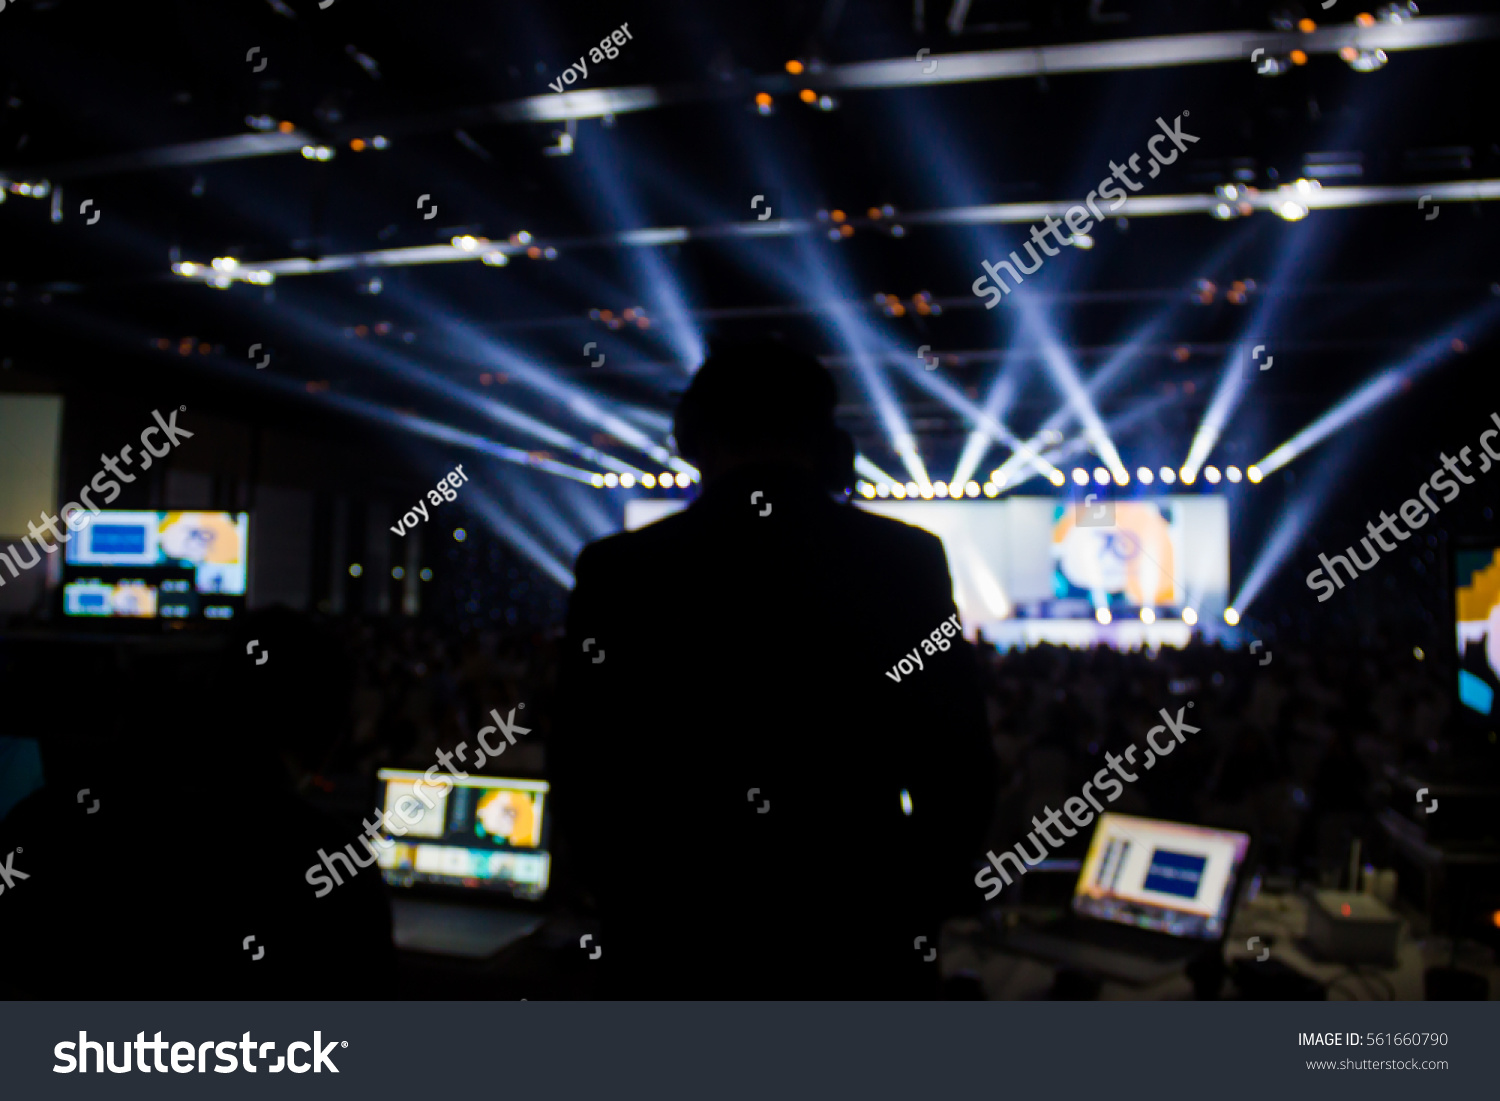 Silhouette of worker control, sound system and lighting in concert. #561660790